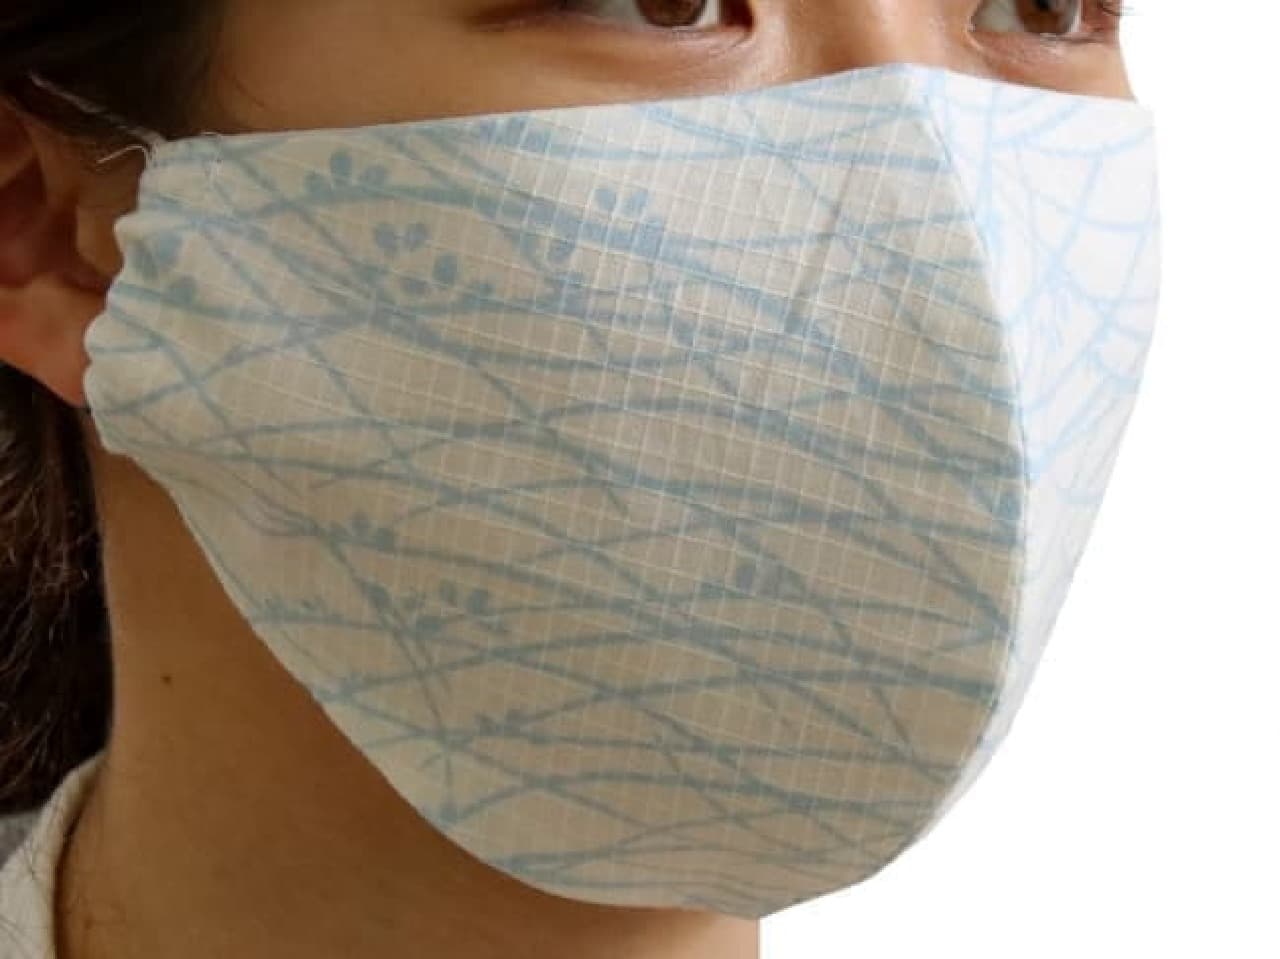 Firmly from under the eyes to the chin! Summer cotton mask to prevent sunburn --Cool with a light blue yukata fabric